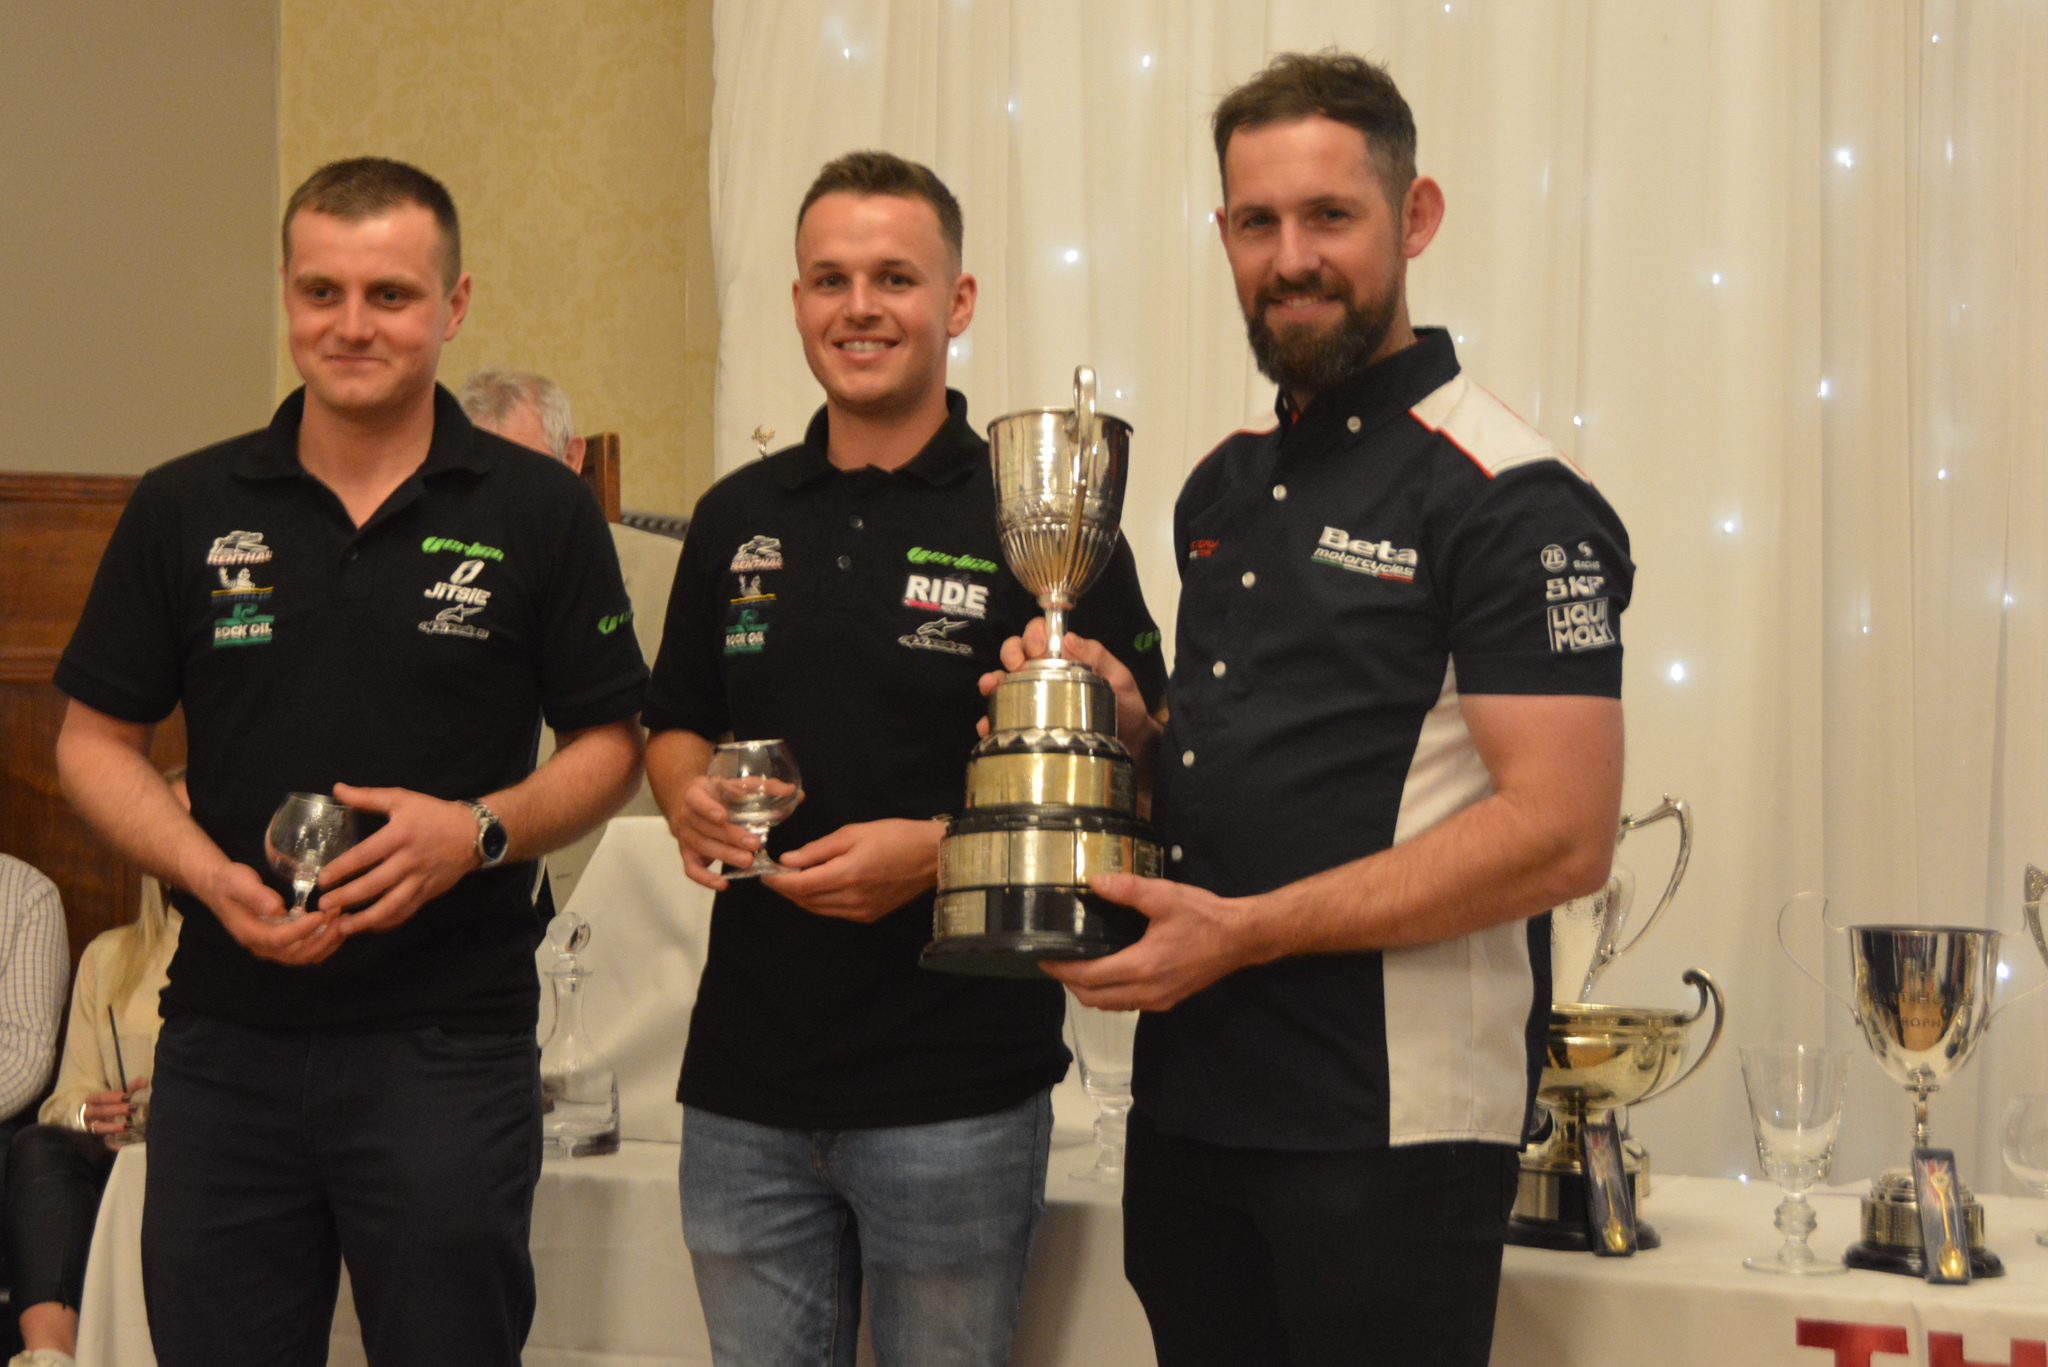 The Club Team award went to the Yeadon & Guiseley A Team, composed of 1st place rider Jack Price (26), 2nd place James Dabill (37) and 12th place Richard Sadler (72)